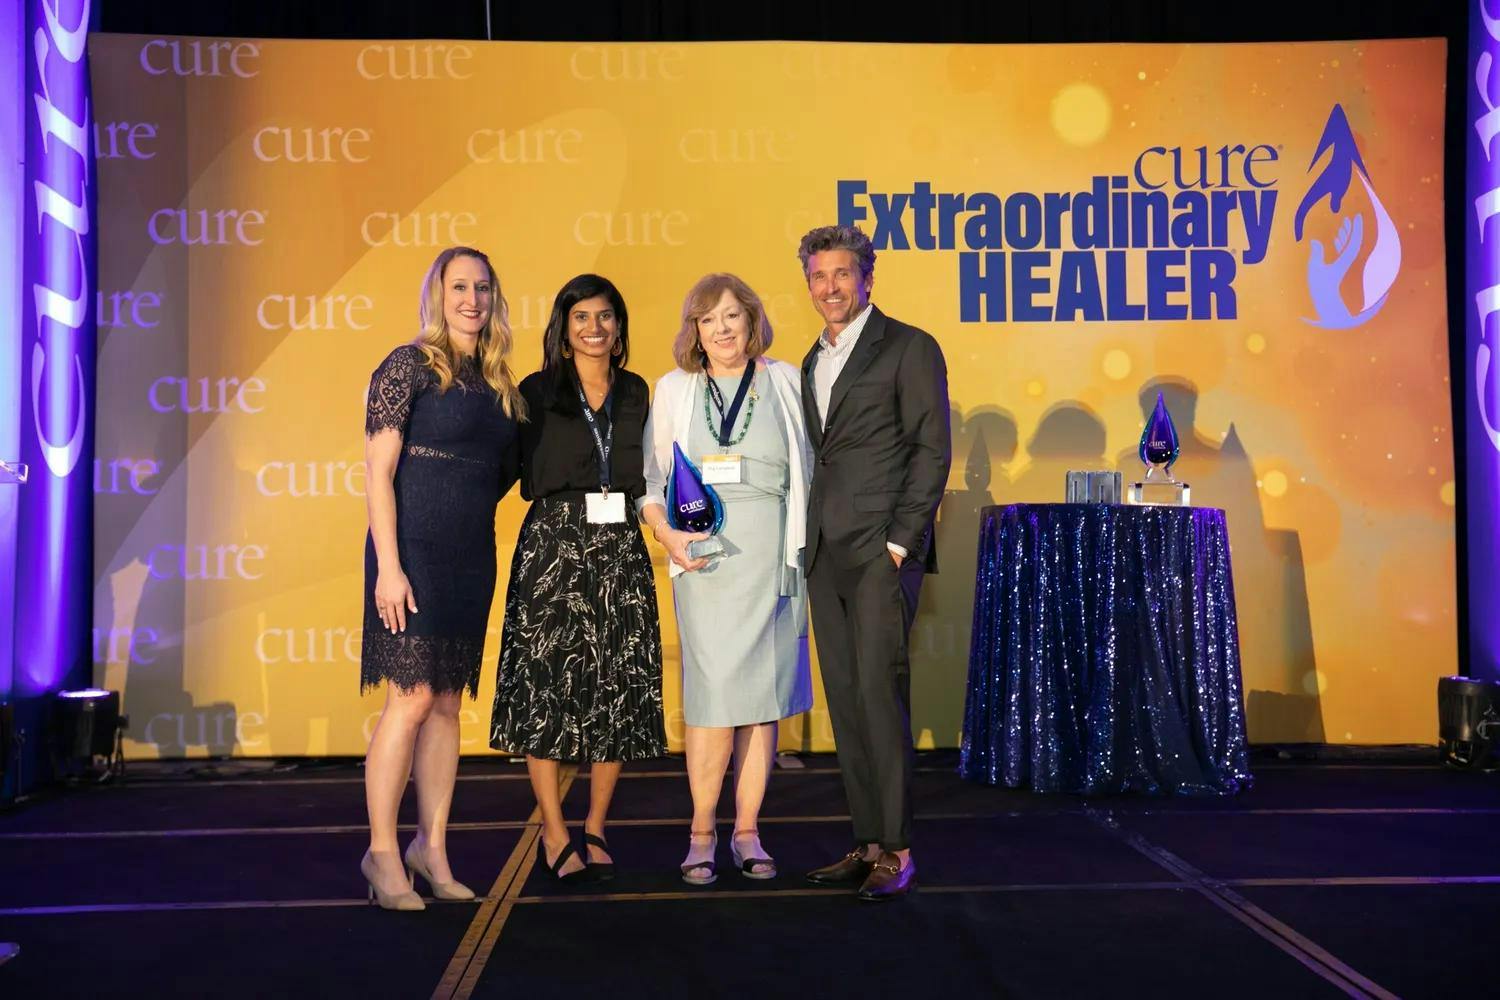 Margaret Campbell, BSN, RN, is joined by friend Nikita Patel, Kristie L. Kahl, vice president of content at MJH Life Sciences, and award-winning actor, producer and cancer advocate, Patrick Dempsey.

From left: Kristie Kahl, Nikita Patel, Margaret Campbell, BSN, RN, Patrick Dempsey.